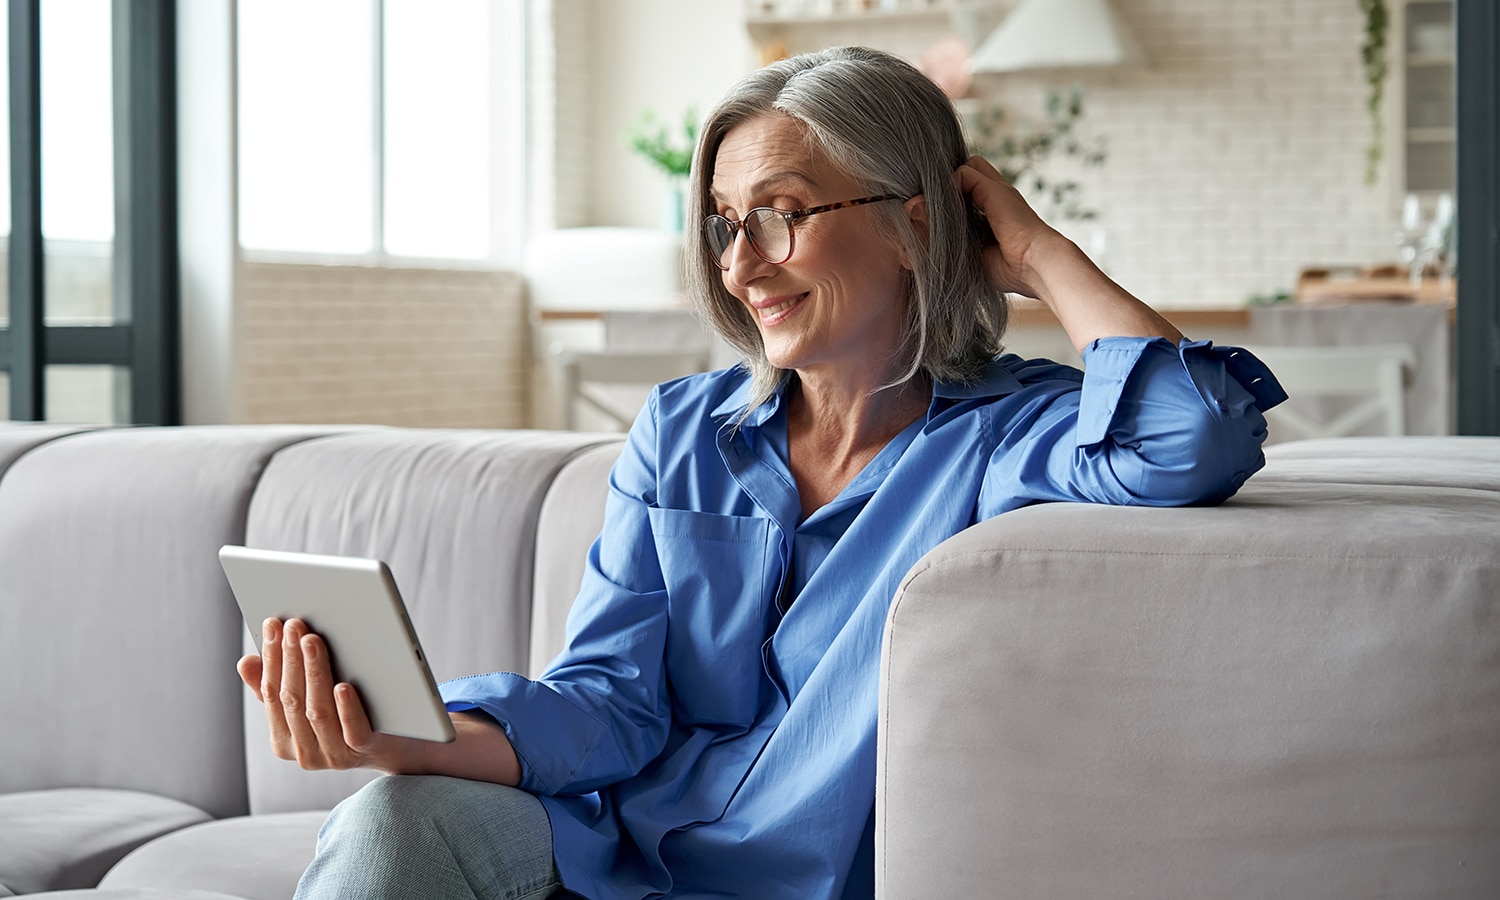 Women’s Bible Study: Living for What Really Matters | Navigators Bible Study Resource | Happy 60s older mature middle aged adult woman holding digital tablet computer conference calling by social distance virtual family online chat meeting or watching video sitting on couch at home.